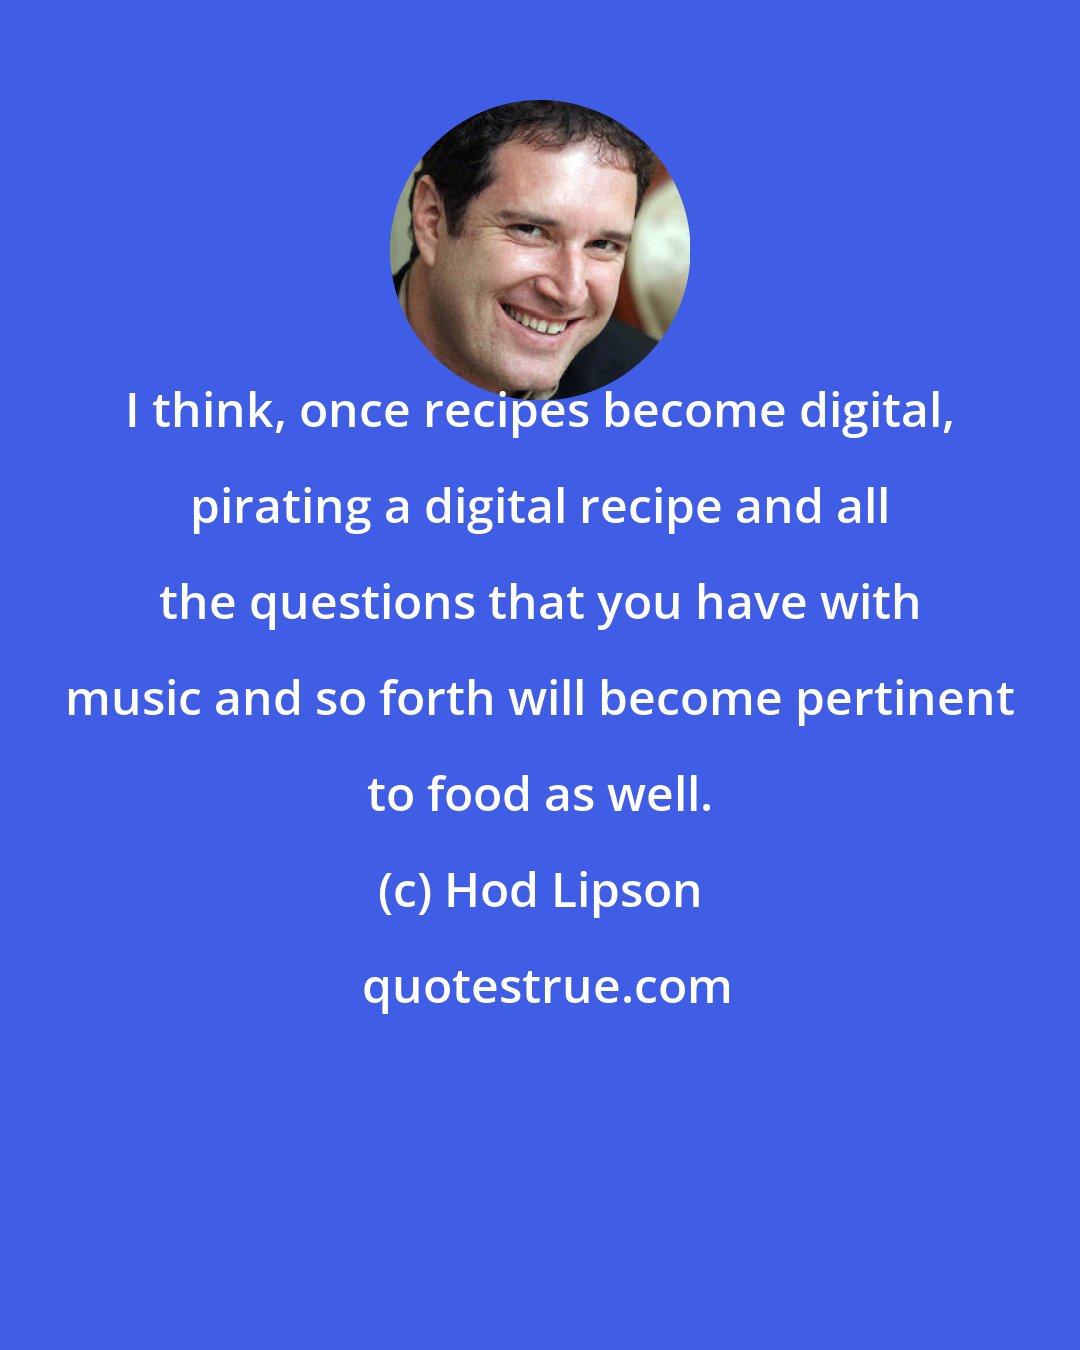 Hod Lipson: I think, once recipes become digital, pirating a digital recipe and all the questions that you have with music and so forth will become pertinent to food as well.